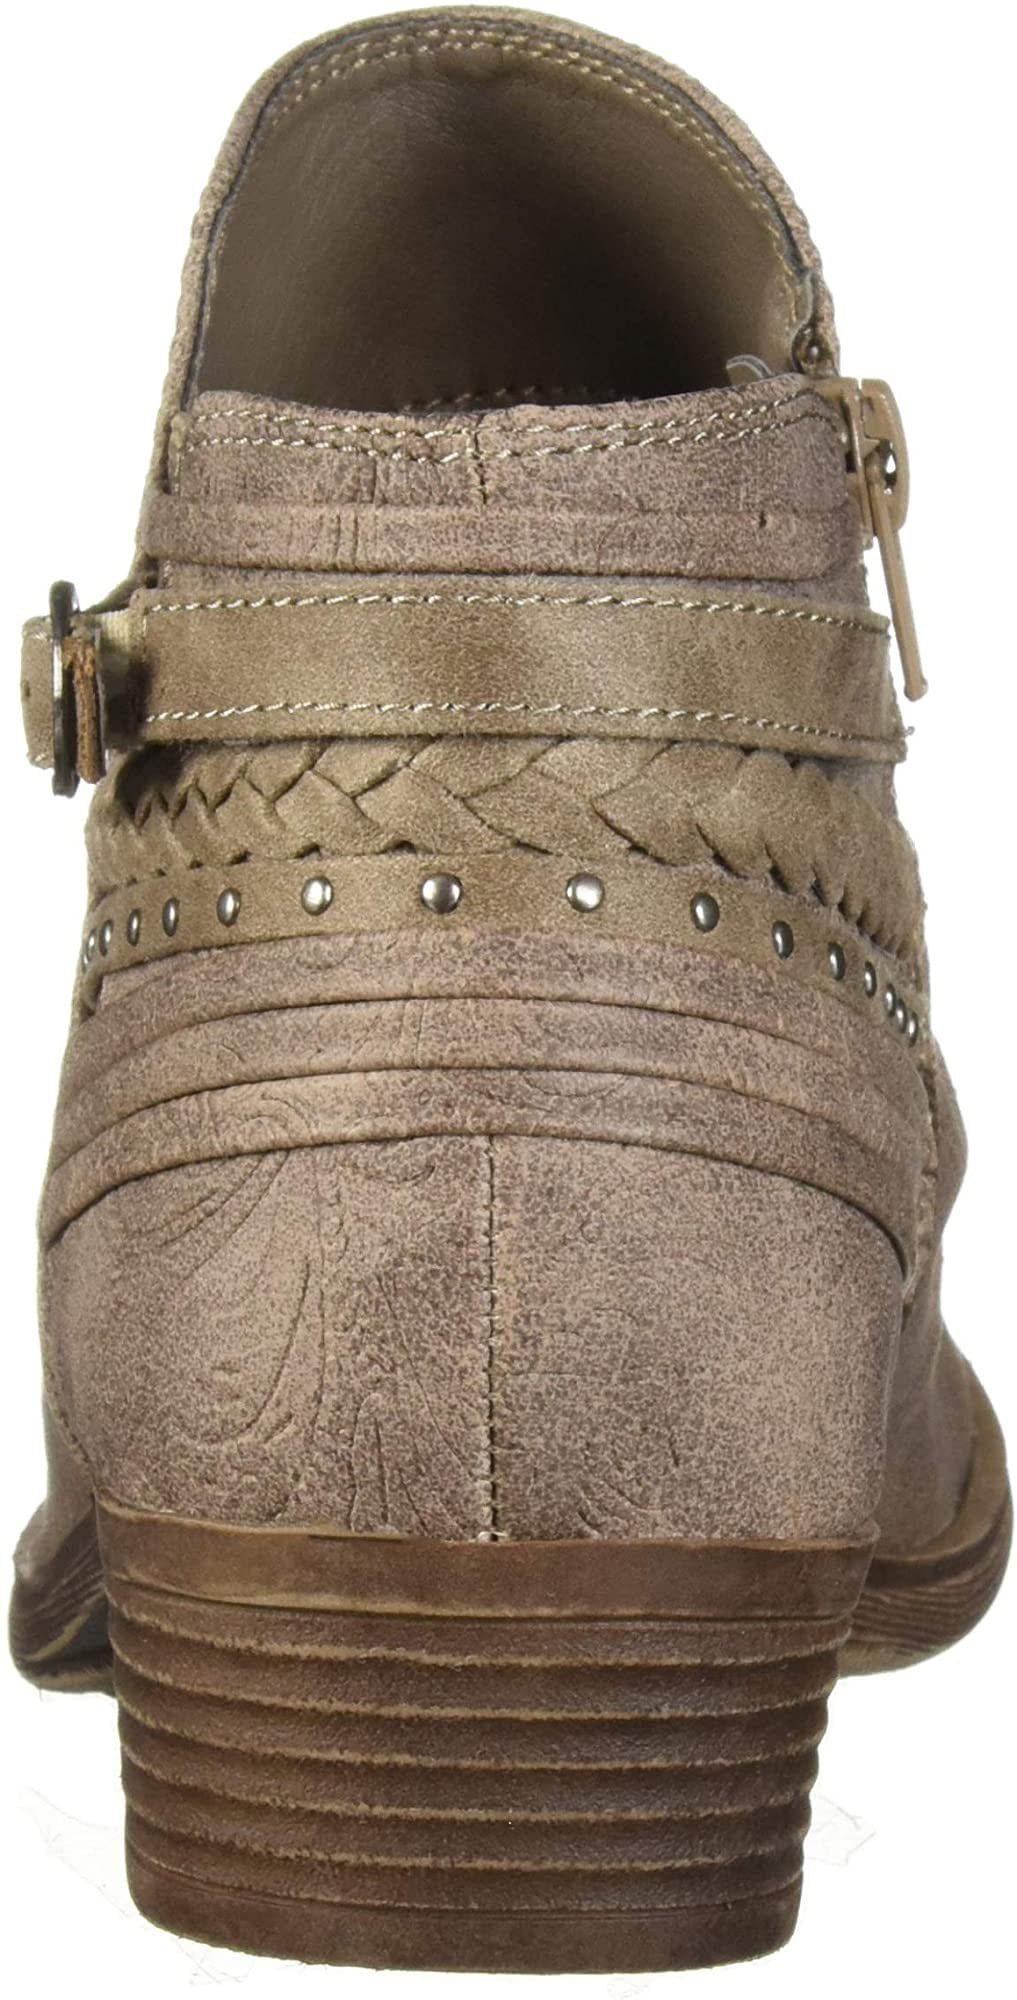 Sugar Womens Tali Dress Block Heel Slouch Ankle Boot Ladies Side Zipper Bootie with Studs and Braid and Buckle Detail